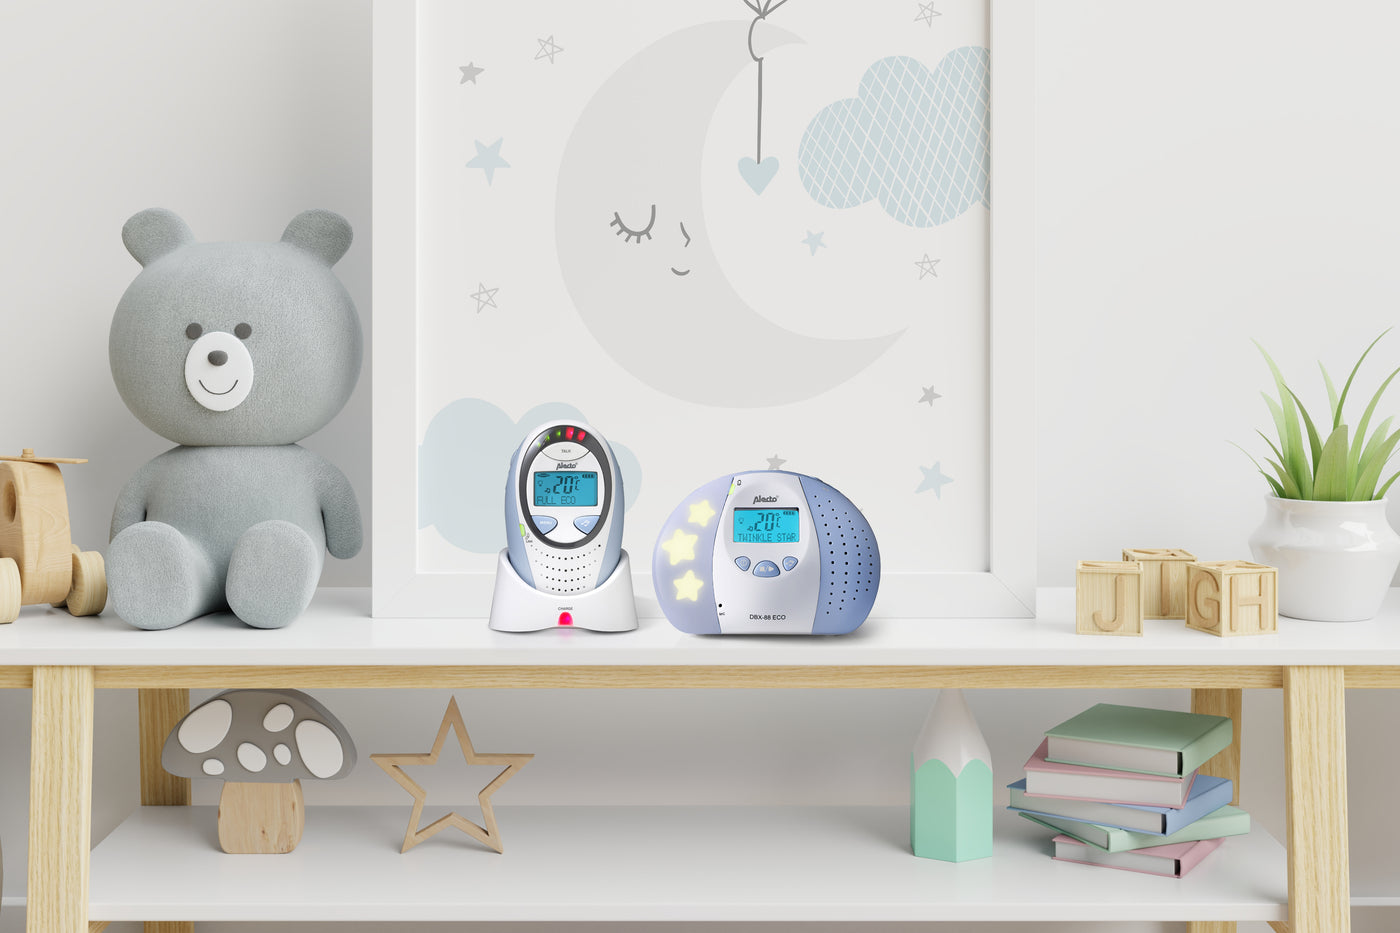 Alecto DBX-88 ECO - Full Eco DECT baby monitor with display, white/blue